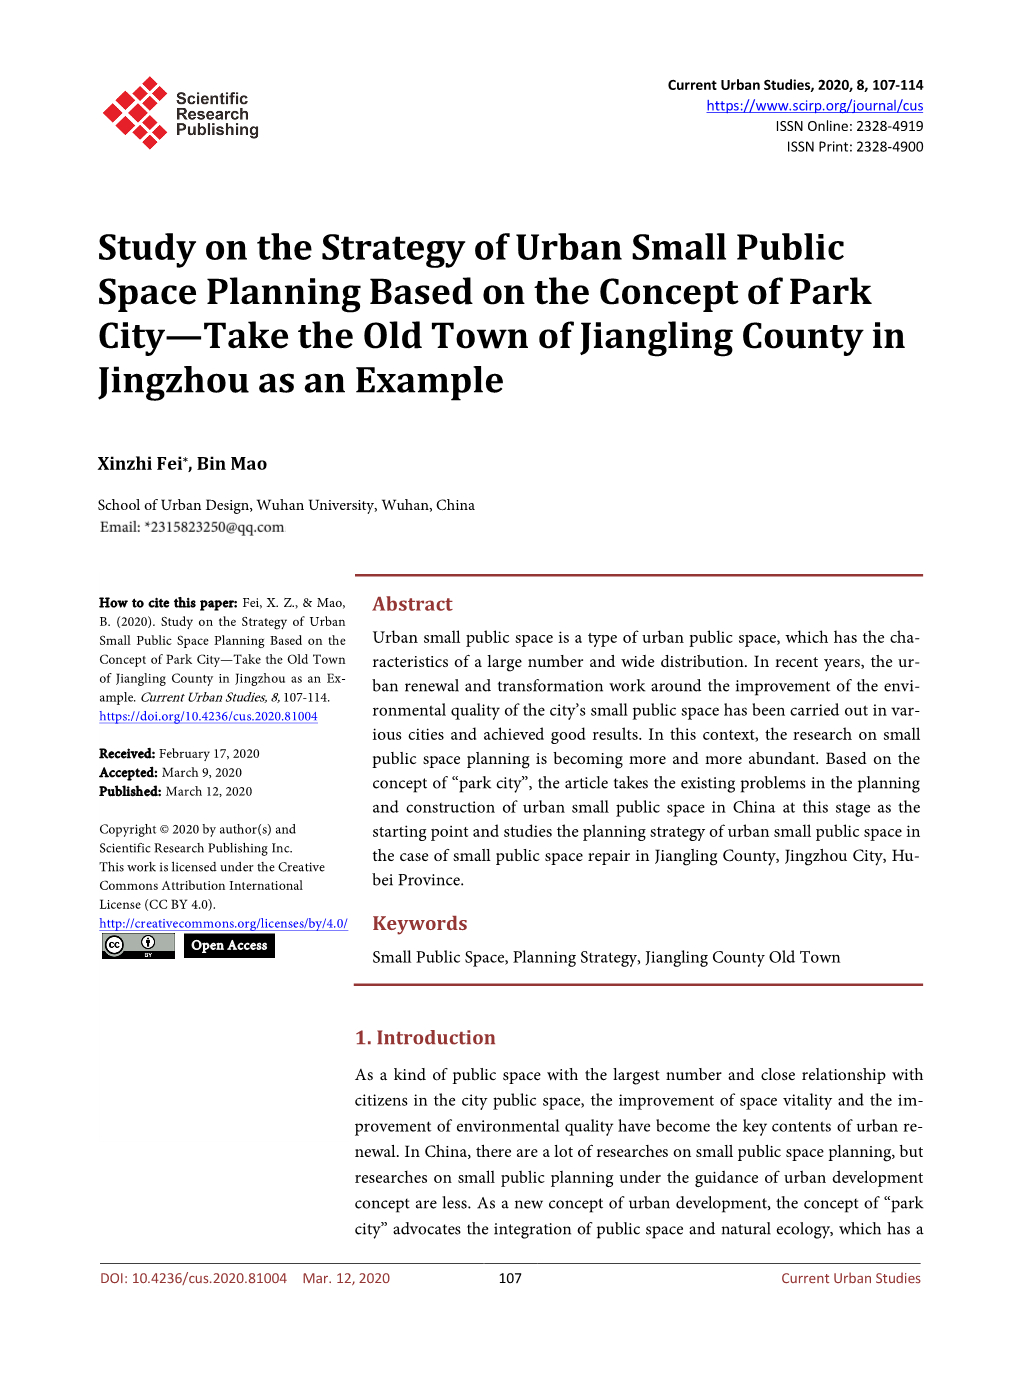 Study on the Strategy of Urban Small Public Space Planning Based on the Concept of Park City—Take the Old Town of Jiangling County in Jingzhou As an Example